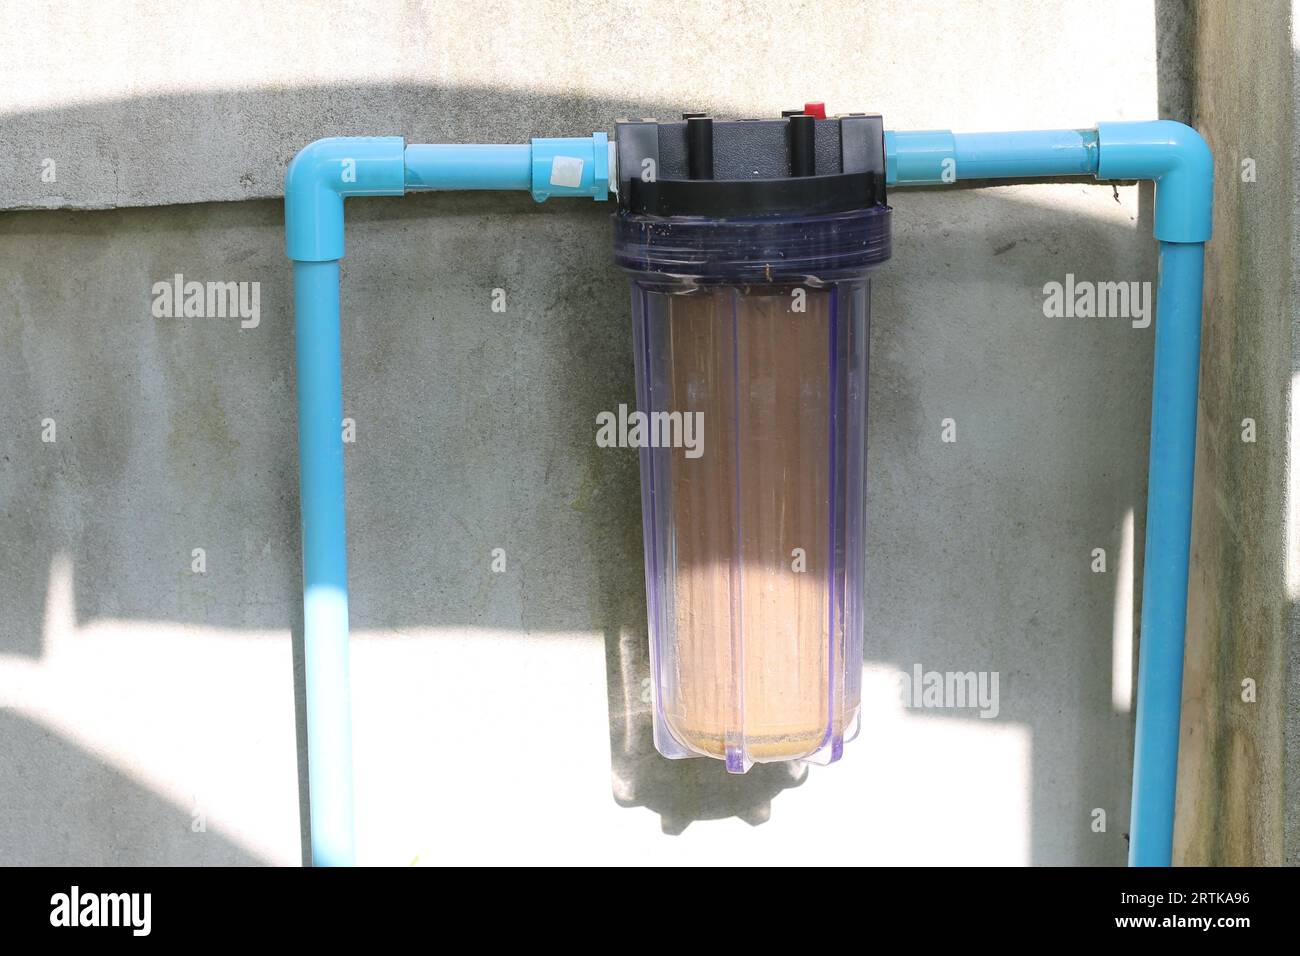 The single stage water filter is mounted on a blue PVC plastic water pipe that is attached to the wall. Stock Photo